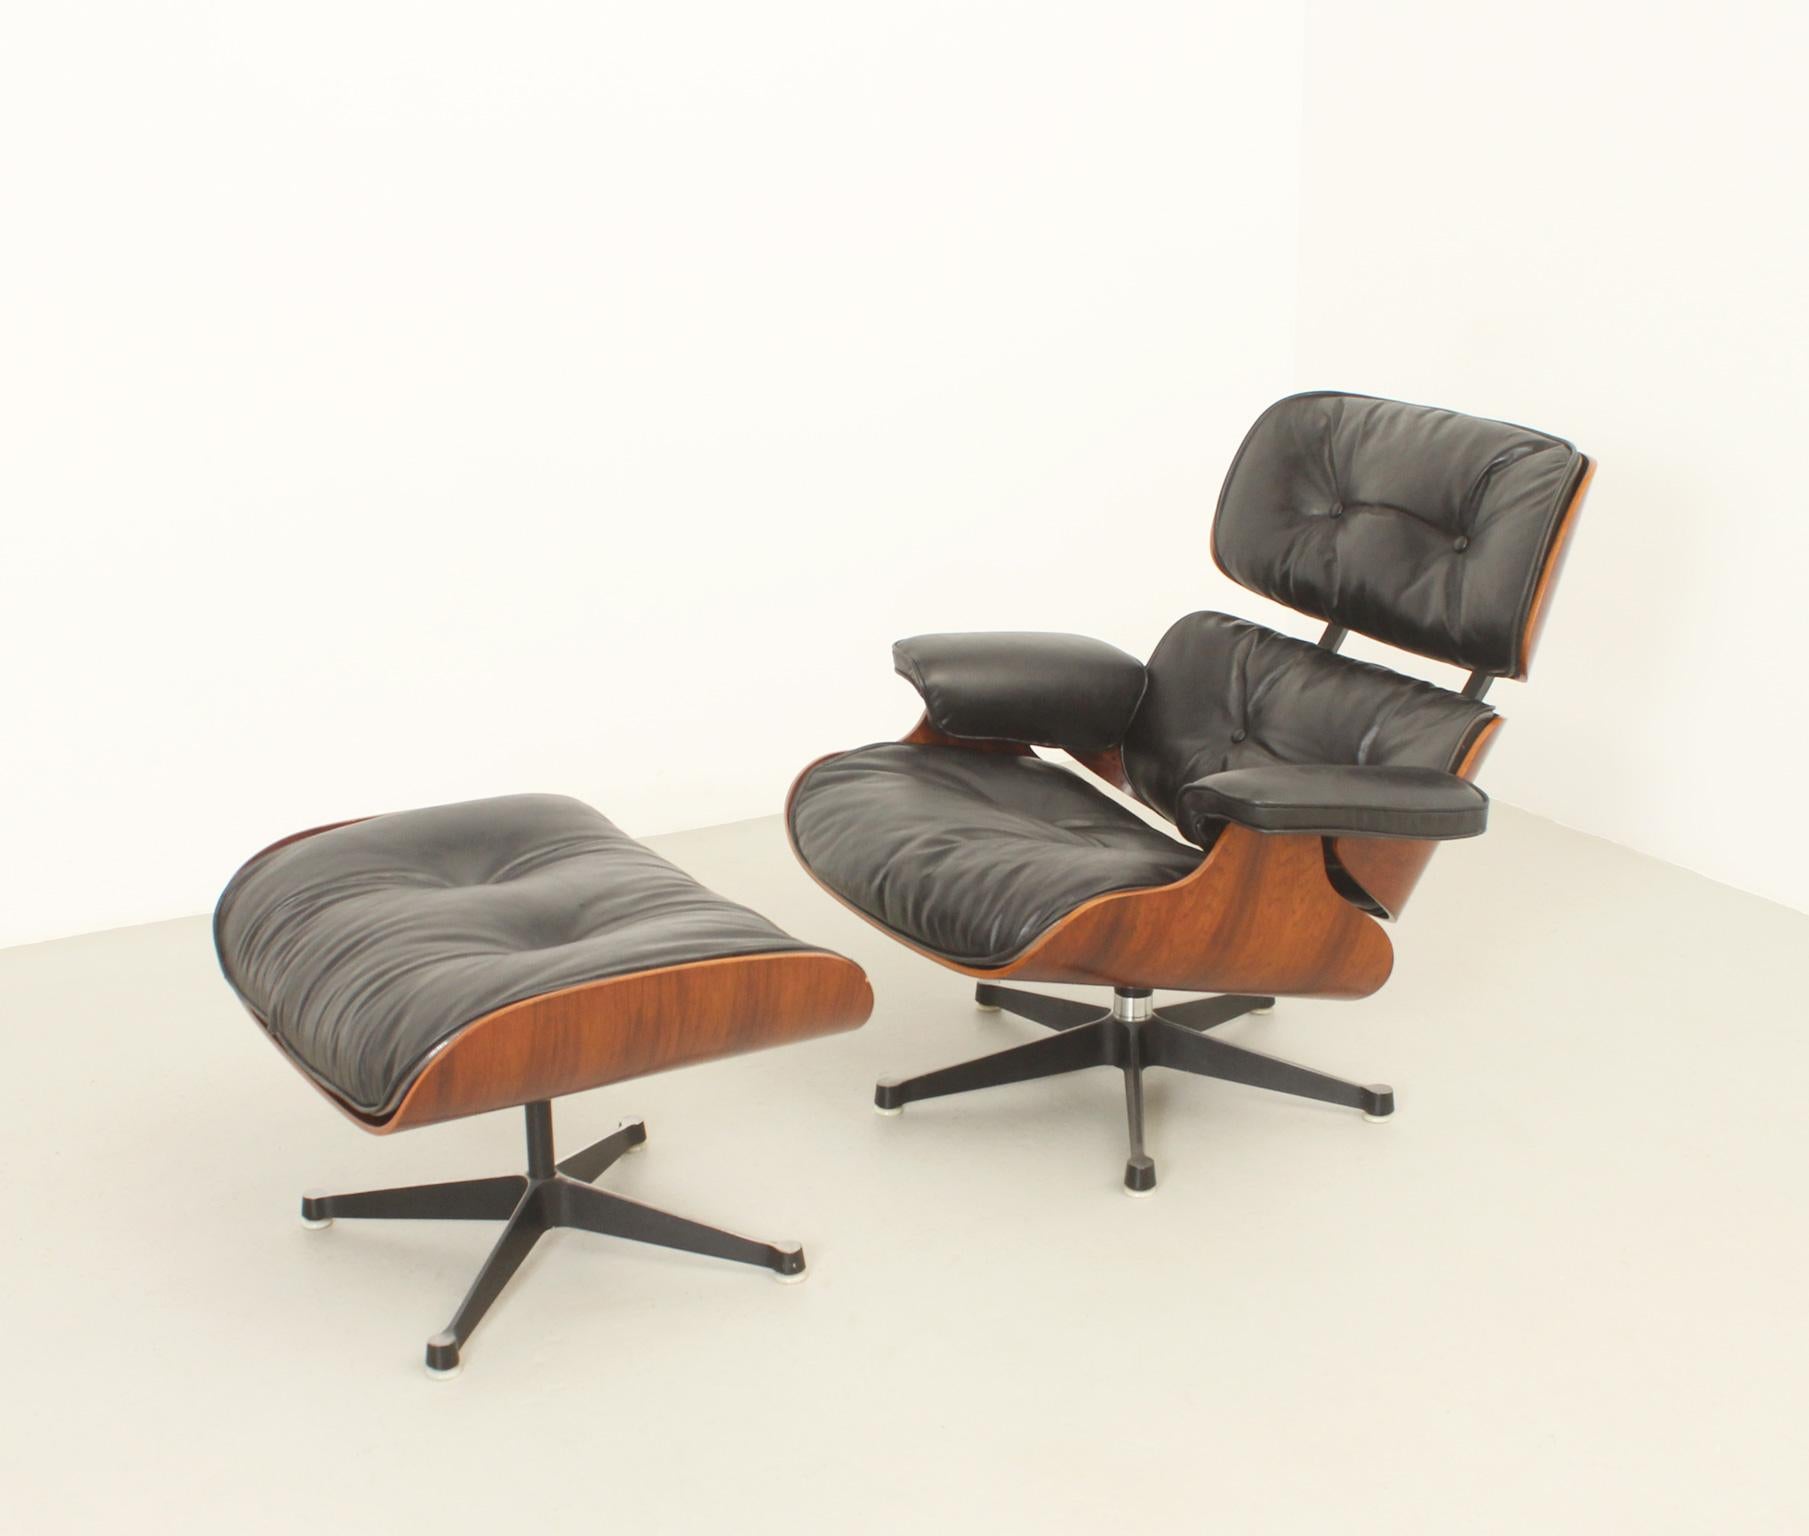 French Lounge Chair and Ottoman by Charles and Ray Eames, 1960's